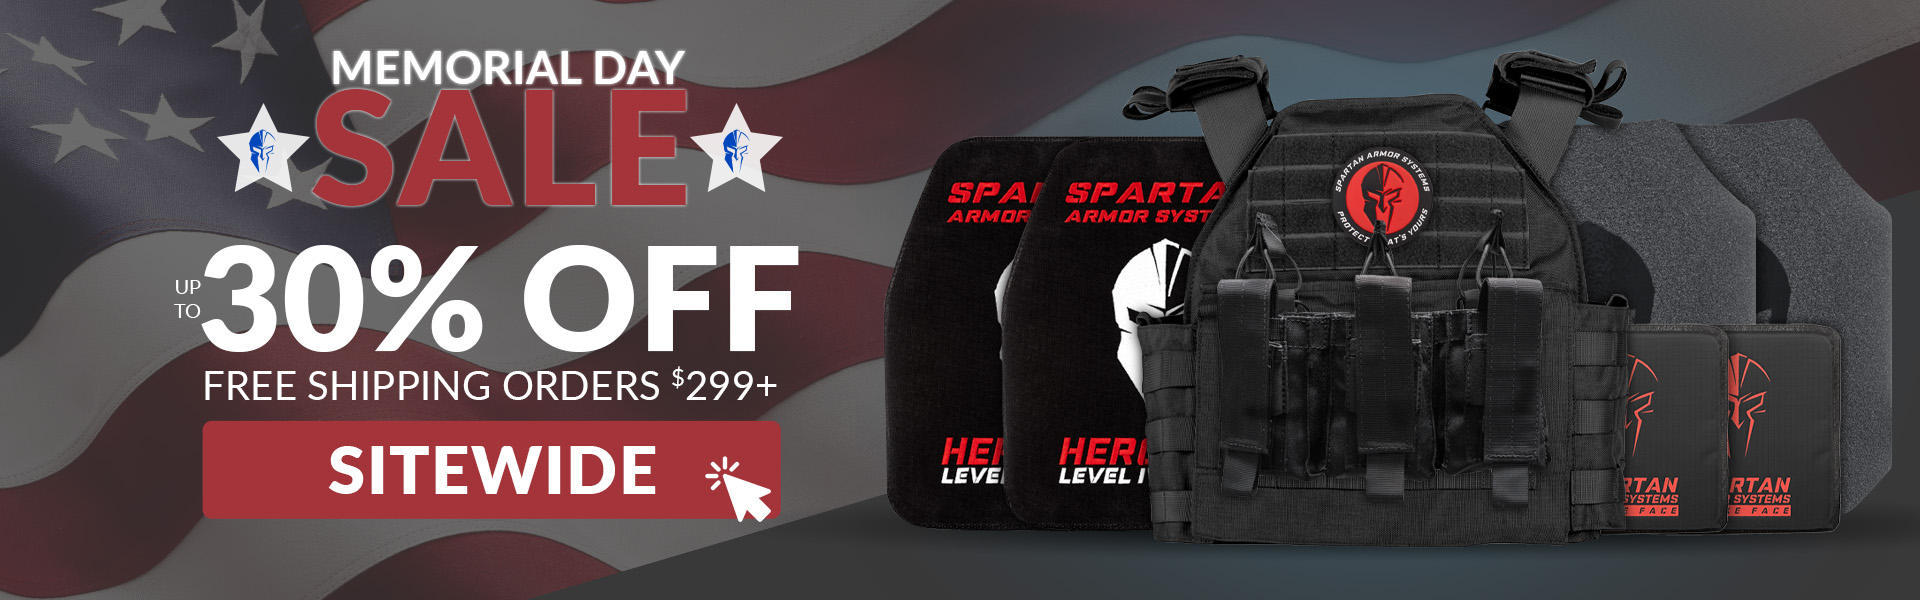 Memorial Day Sale Now Live!